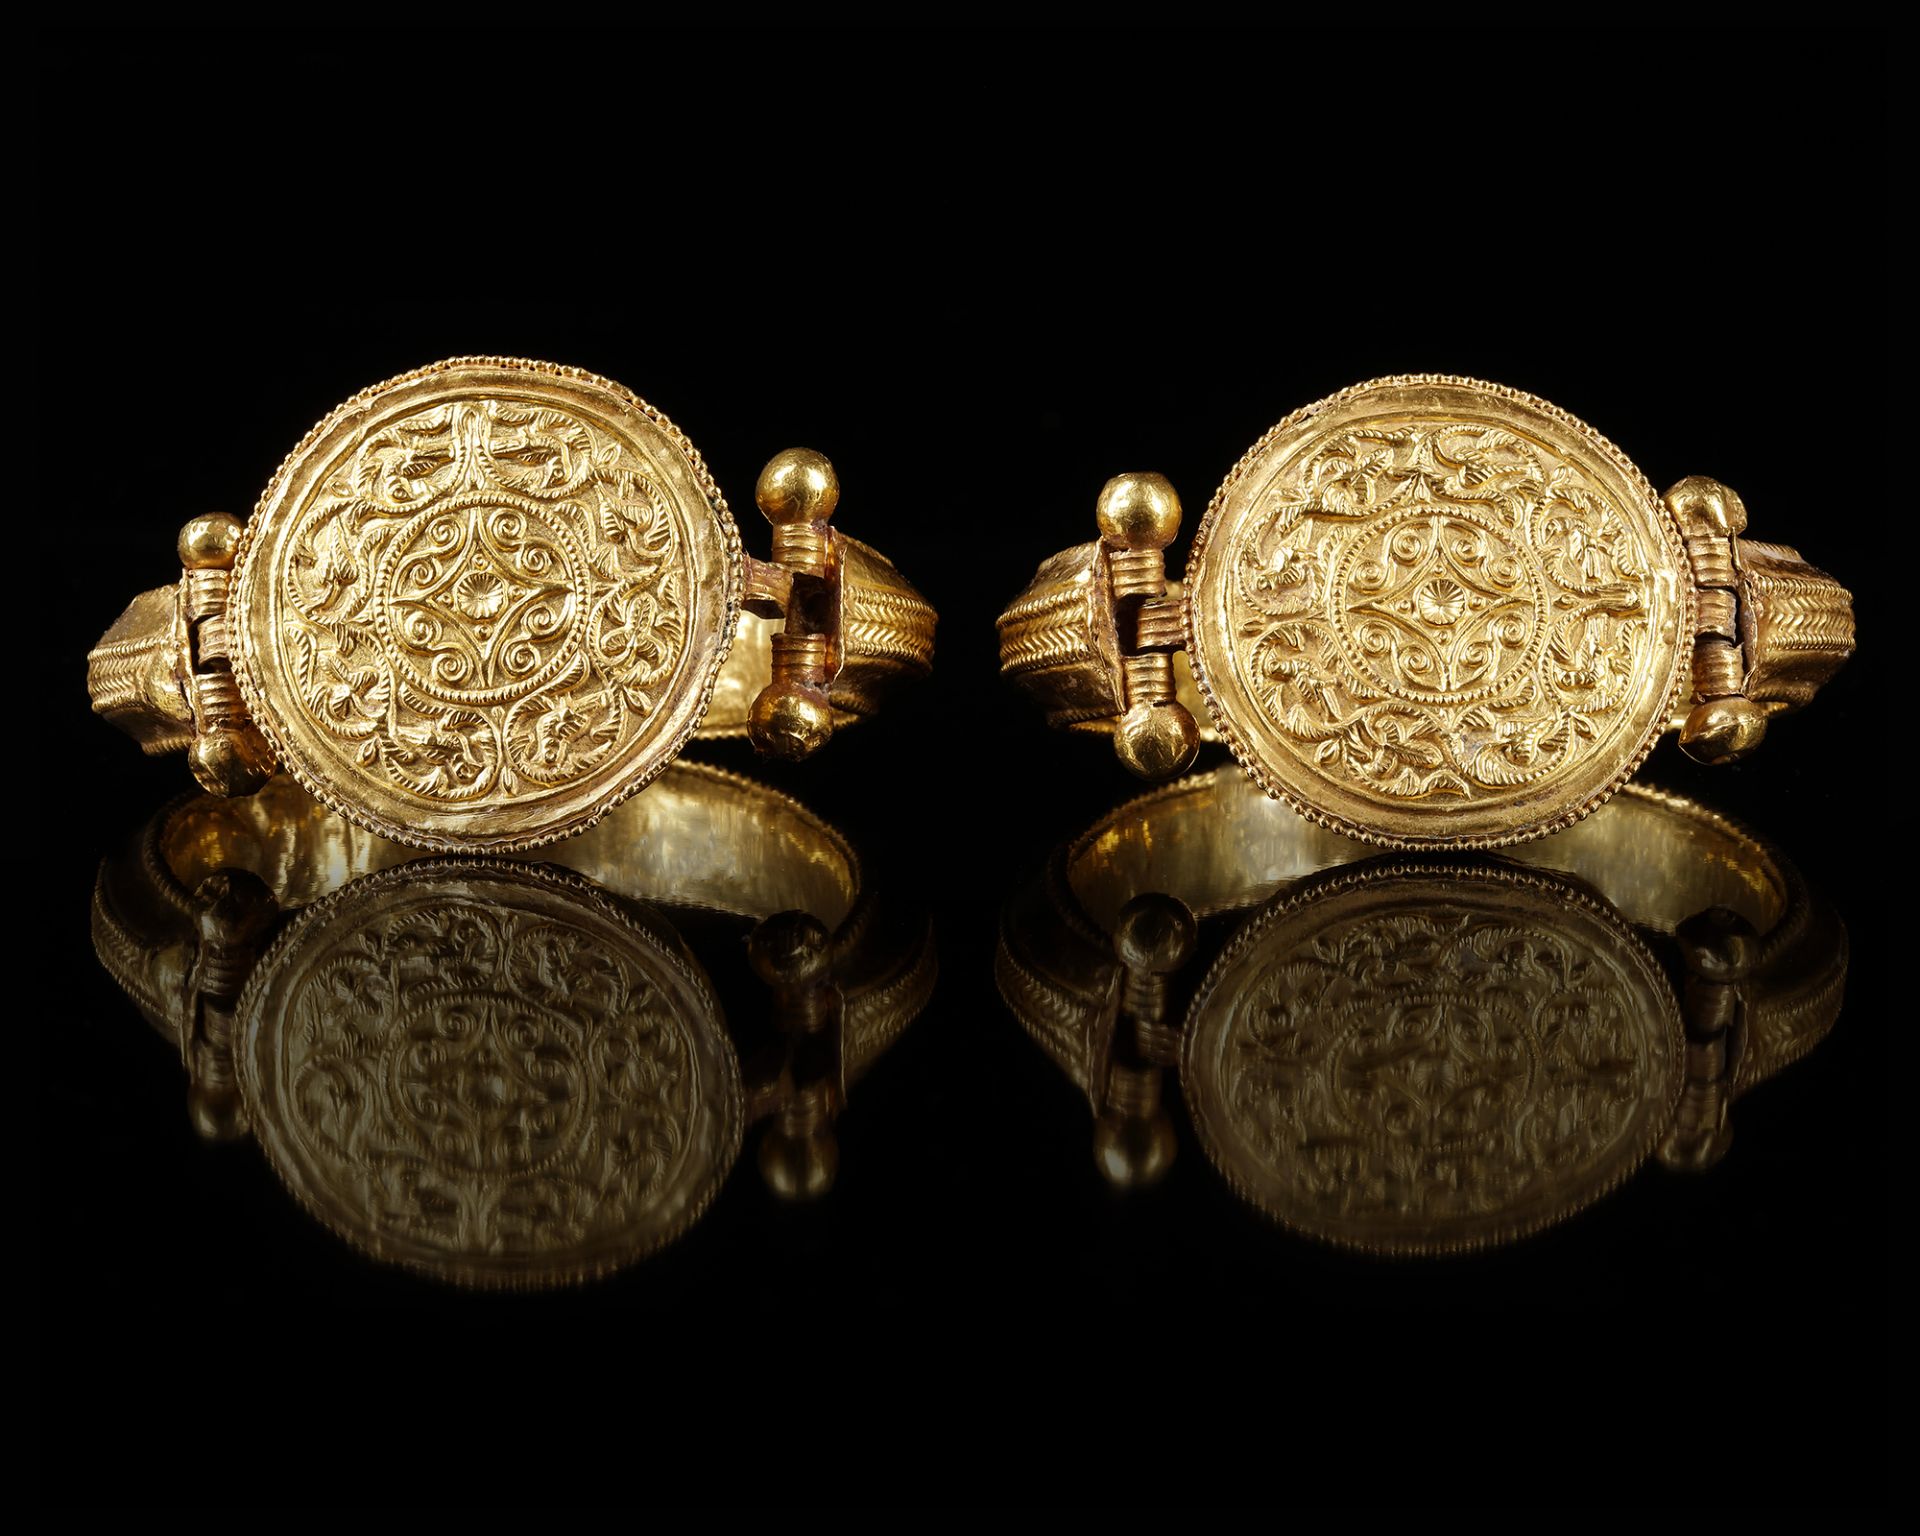 A RARE PAIR OF A FATIMID GOLD BRACELETS, POSSIBLY SYRIA, 11TH CENTURY - Image 4 of 14